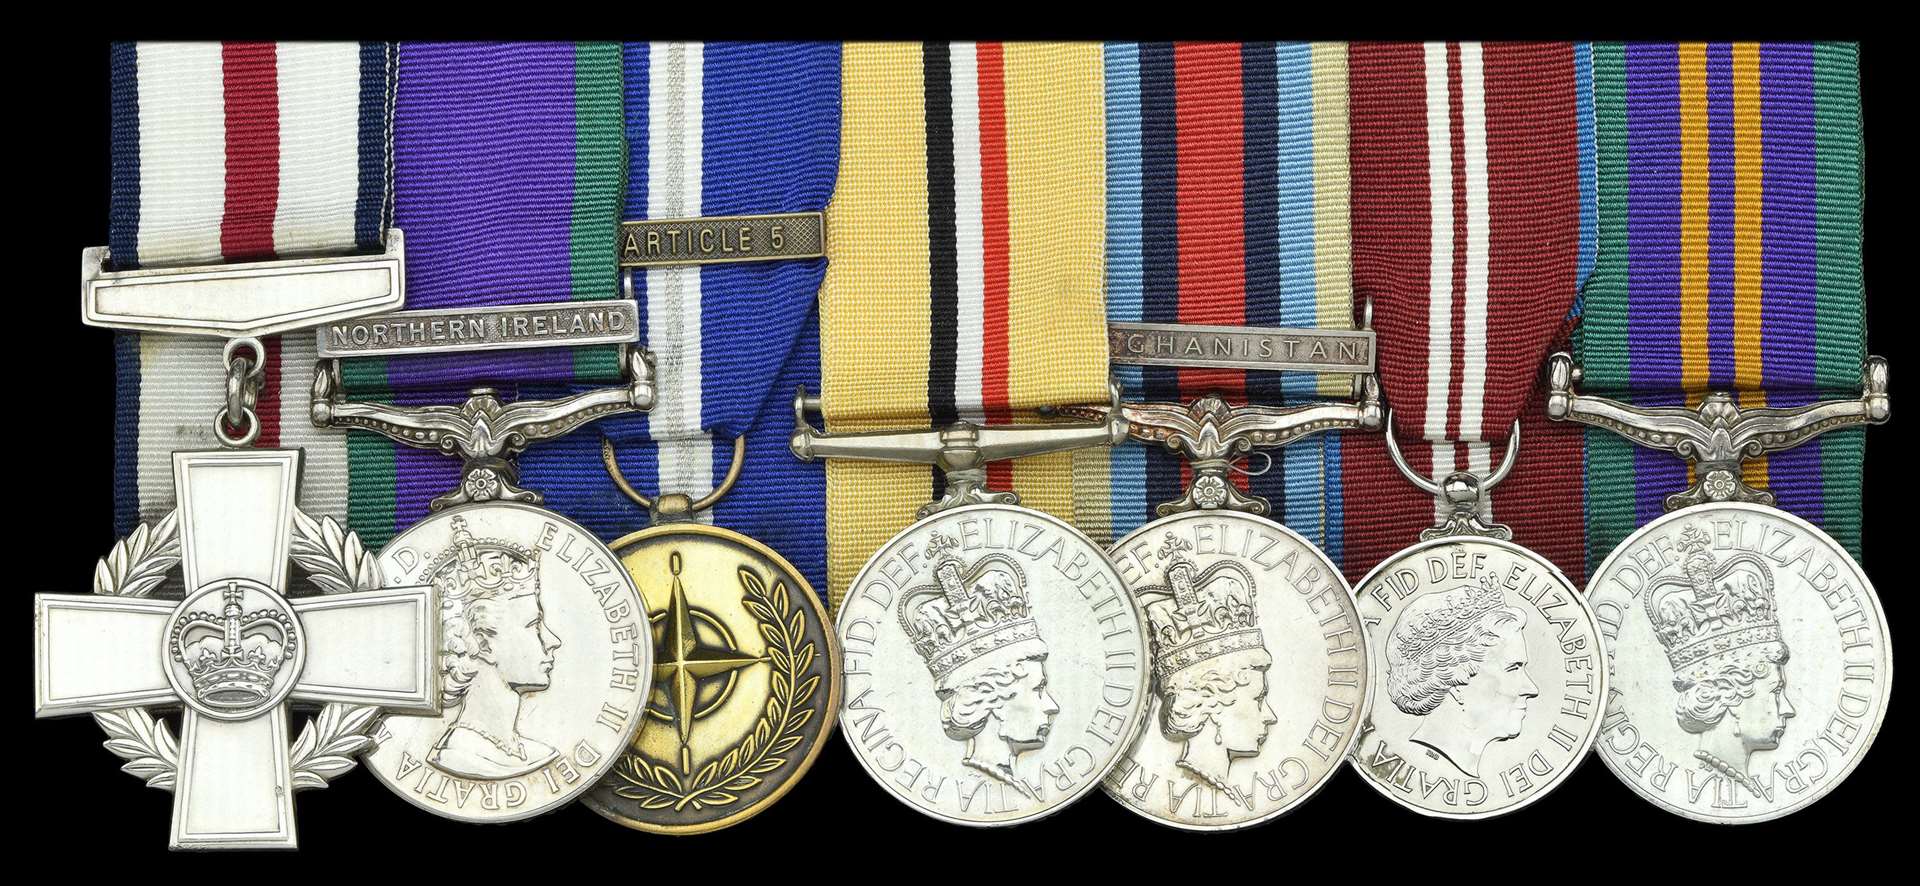 Among the medals were a General Service Medal, the Operational Service Medal for Afghanistan and the Jubilee Medal (Dix Noonan Webb/PA)